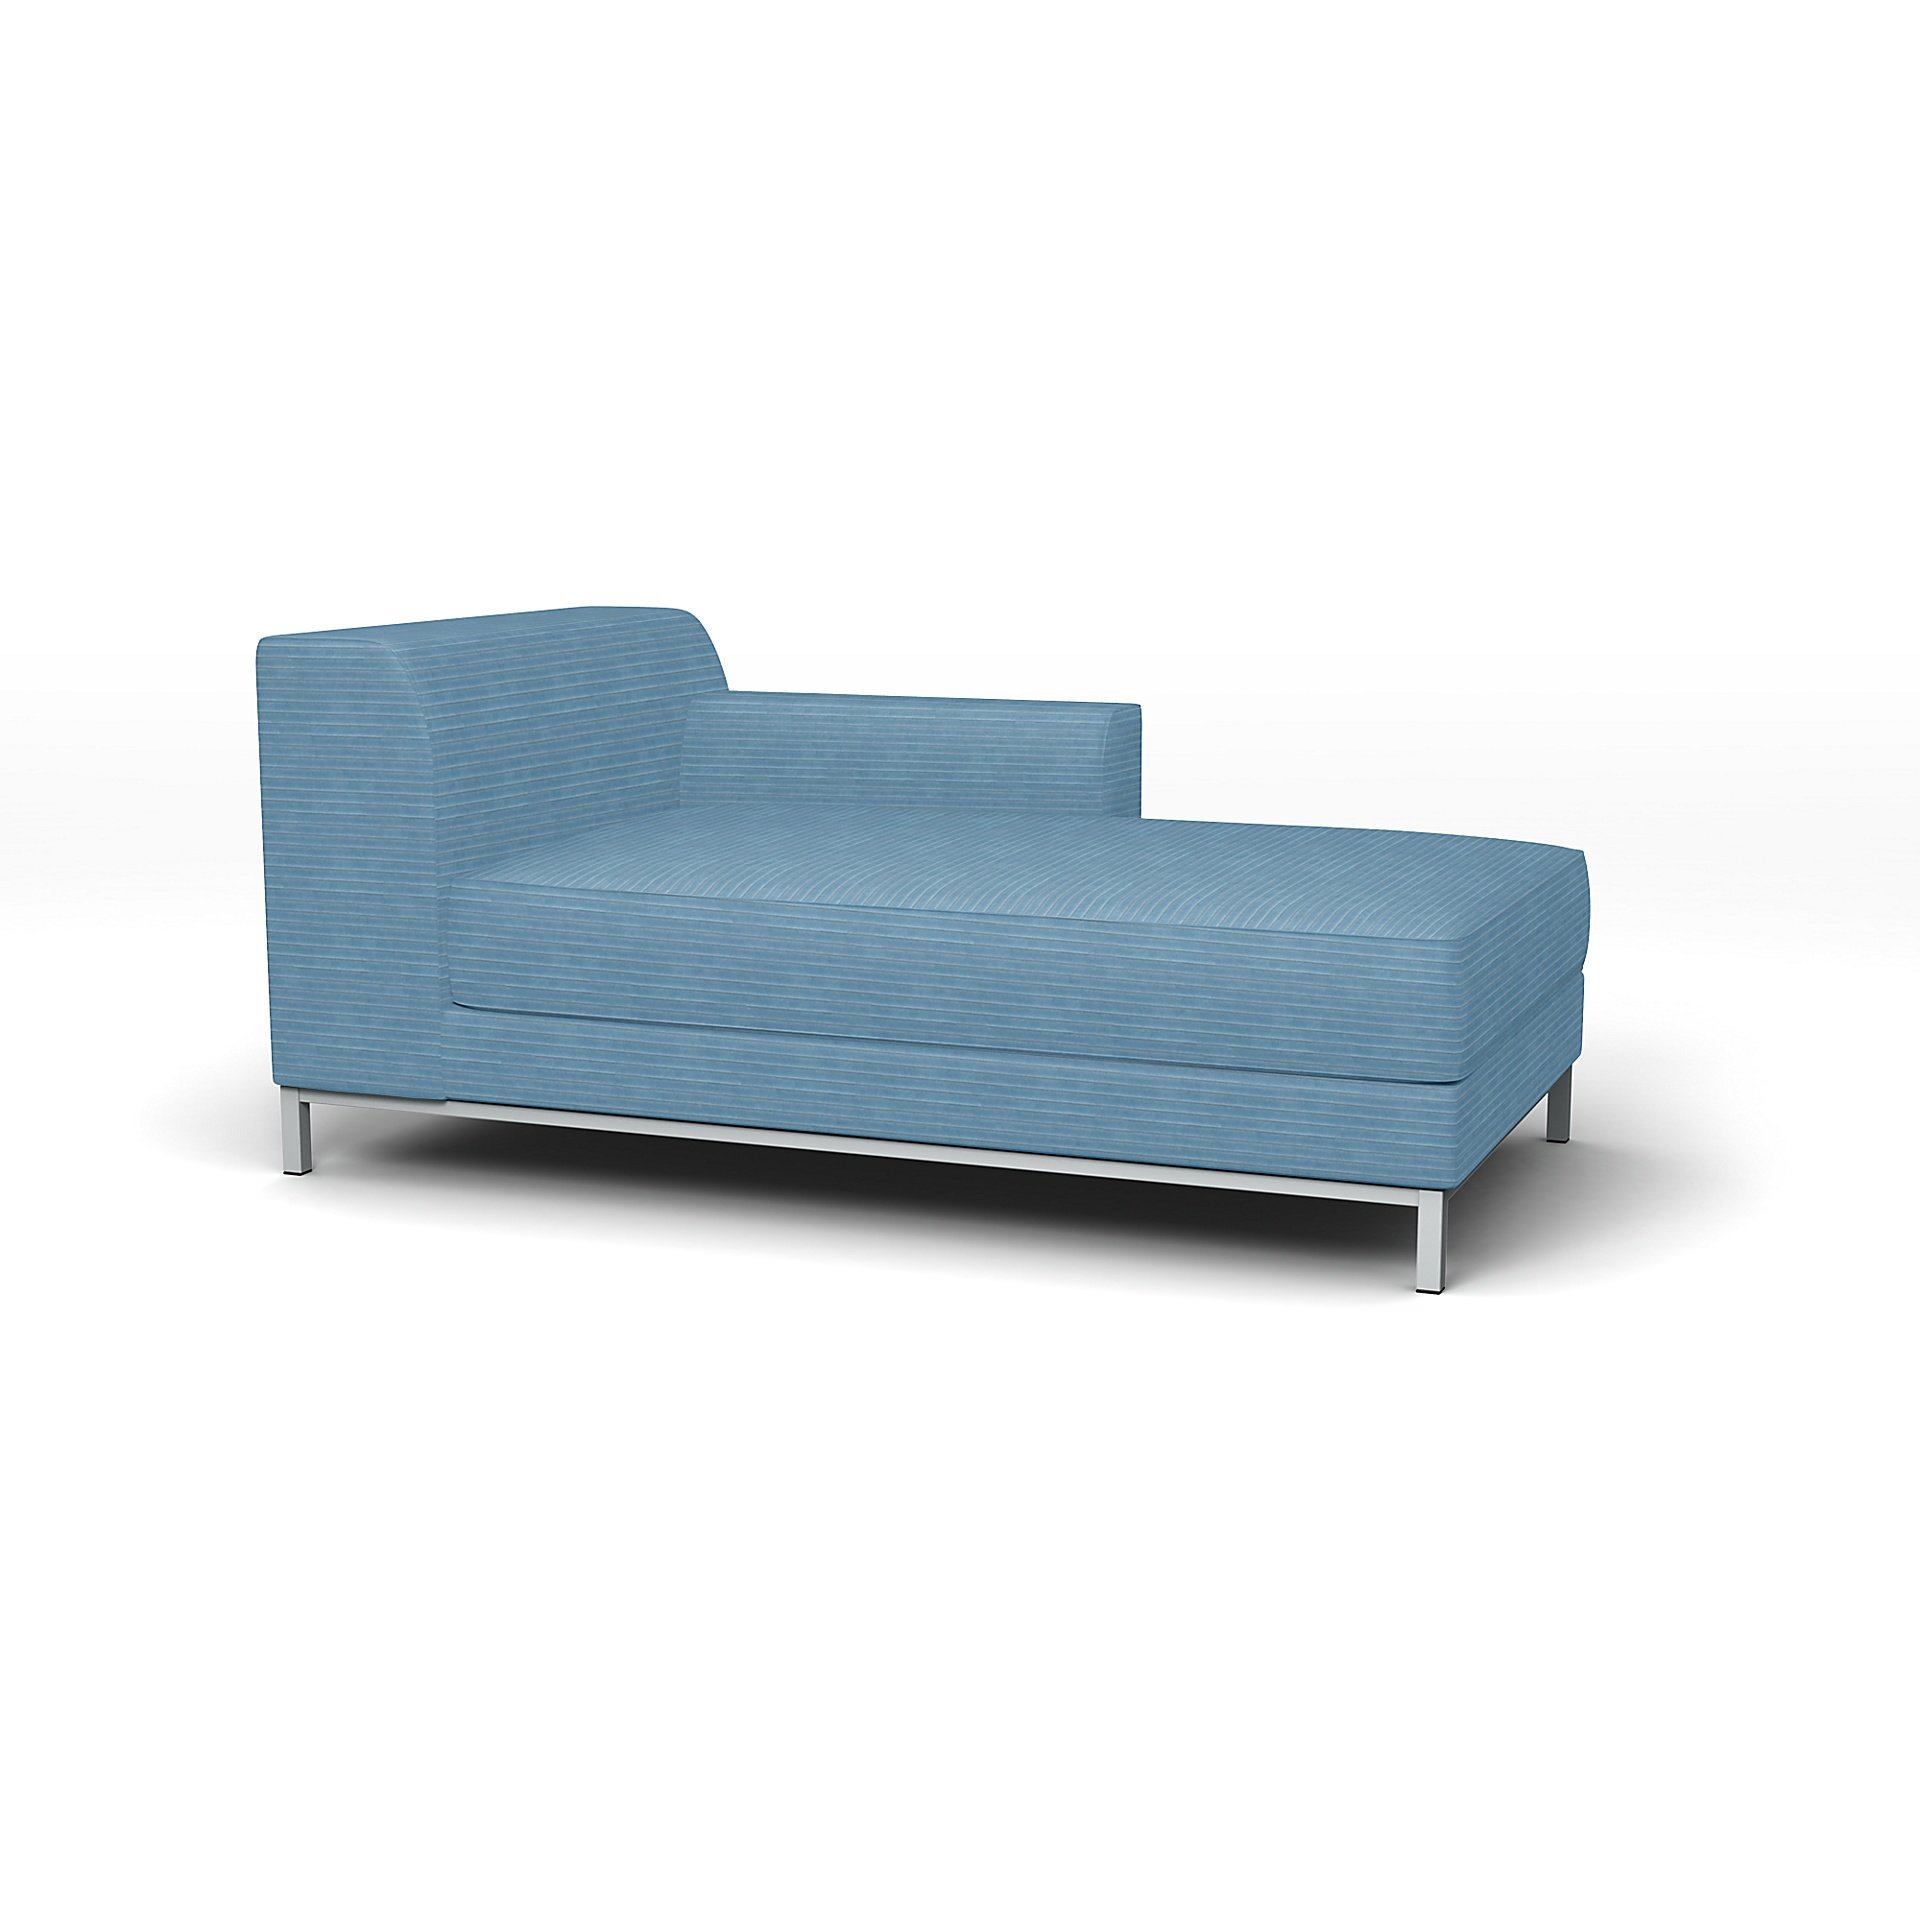 IKEA - Kramfors Chaise Longue with Right Arm Cover, Sky Blue, Corduroy - Bemz